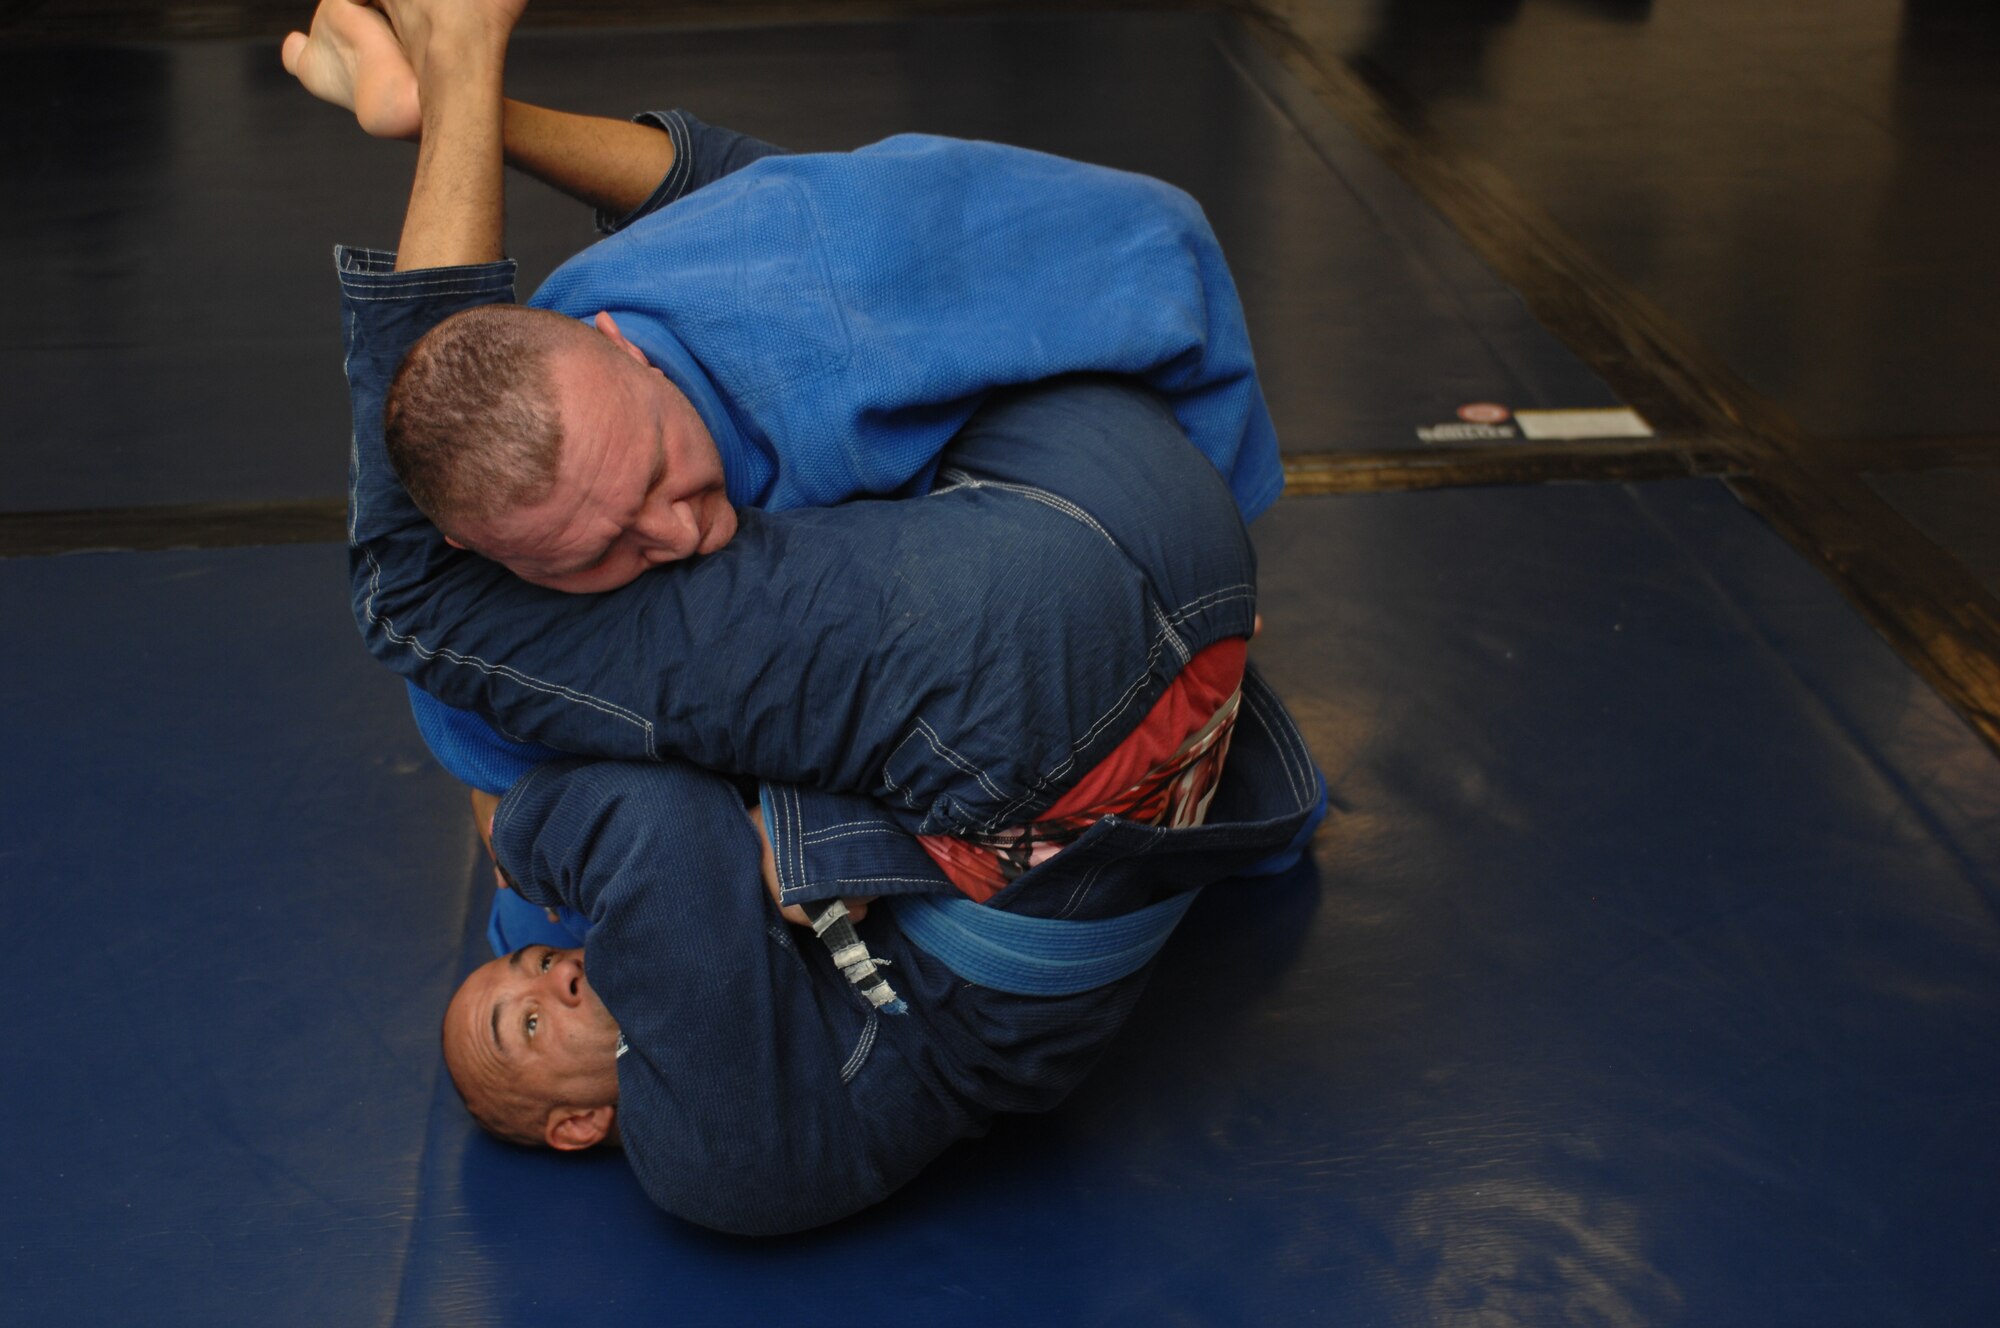 Leo Pavlushkin, 355th Security Force Squadron lead police officer, grapples with Garrett Clark, Air Force veteran and jiujitsu instructor during a Brazilian jiujitsu class at Davis-Monthan Air Force Base, Ariz., Sept. 30, 2015. The class is held Monday, Wednesday and Friday at 4:30 p.m. in the upstairs of the Airman Leadership School building 4455. (U.S. Air Force photo by Airman Basic Nathan H. Barbour/Released)